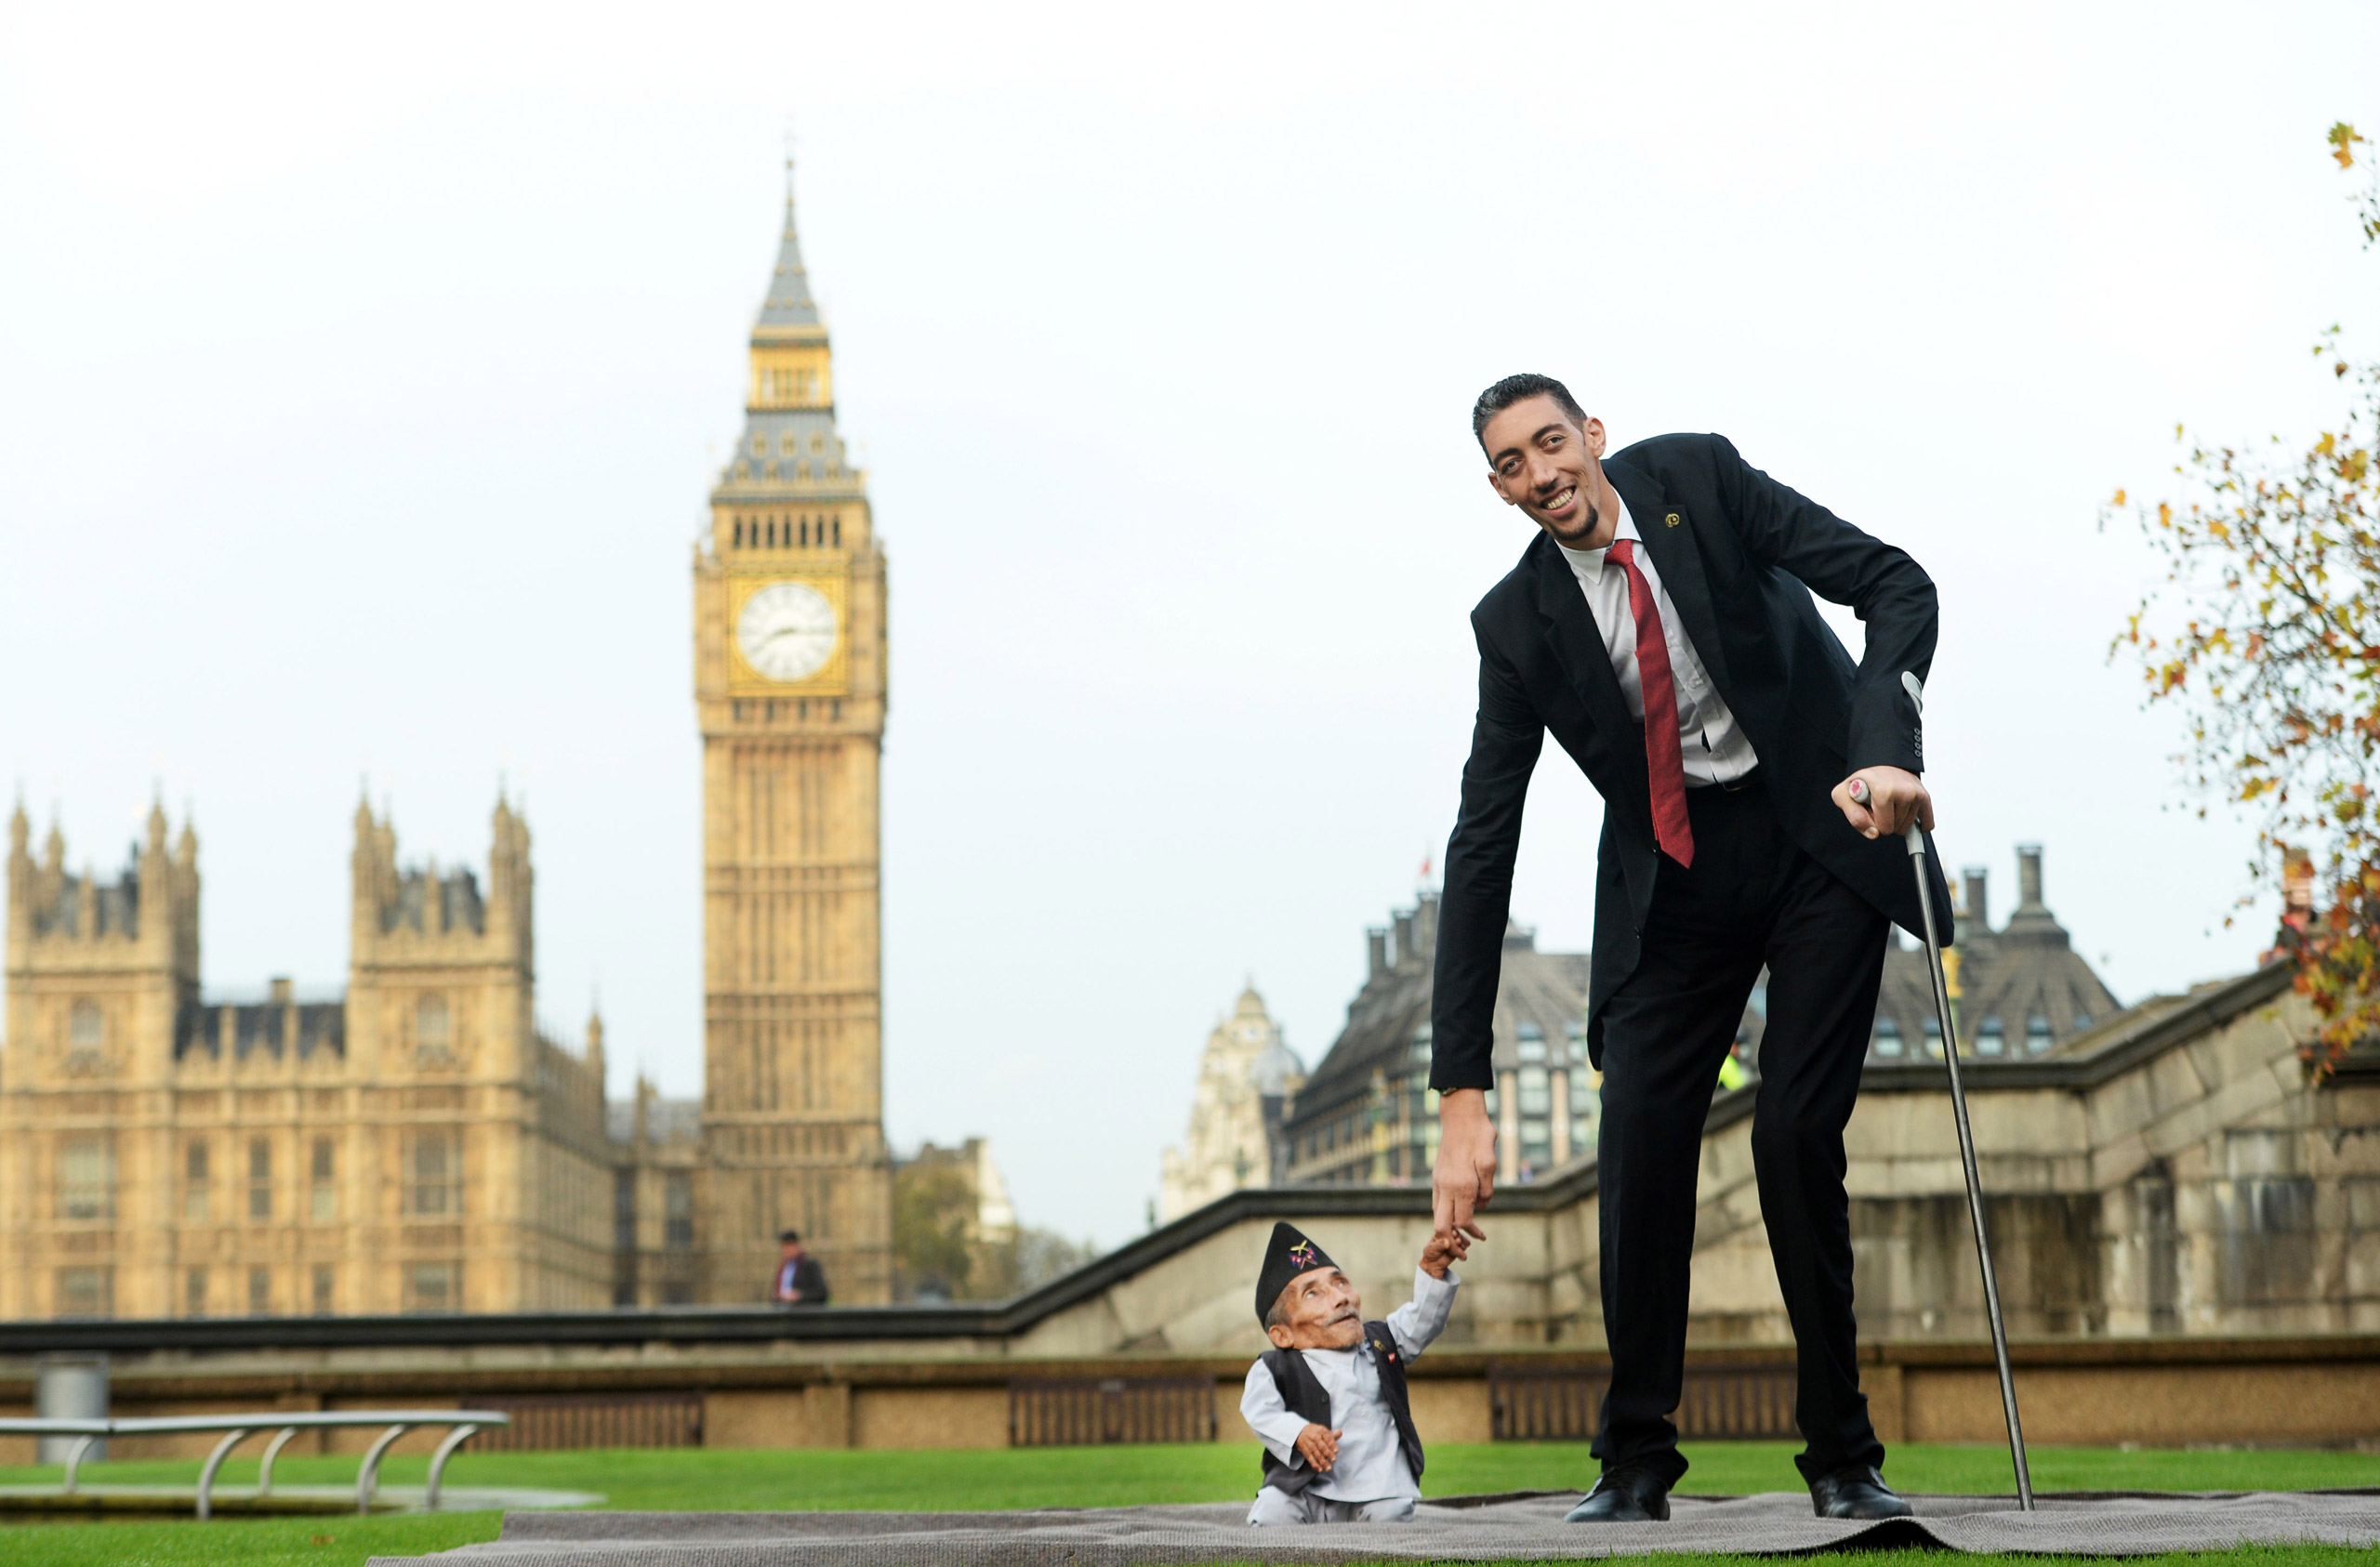 Chandra Bahadur Dangi, formerly the world's shortest man, posing with the world's tallest man, Sultan Kosen from Turkey, during a photocall for the Guinness World Records in London on Nov. 13, 2014. (Facundo Arrizabalaga—EPA/Corbis)